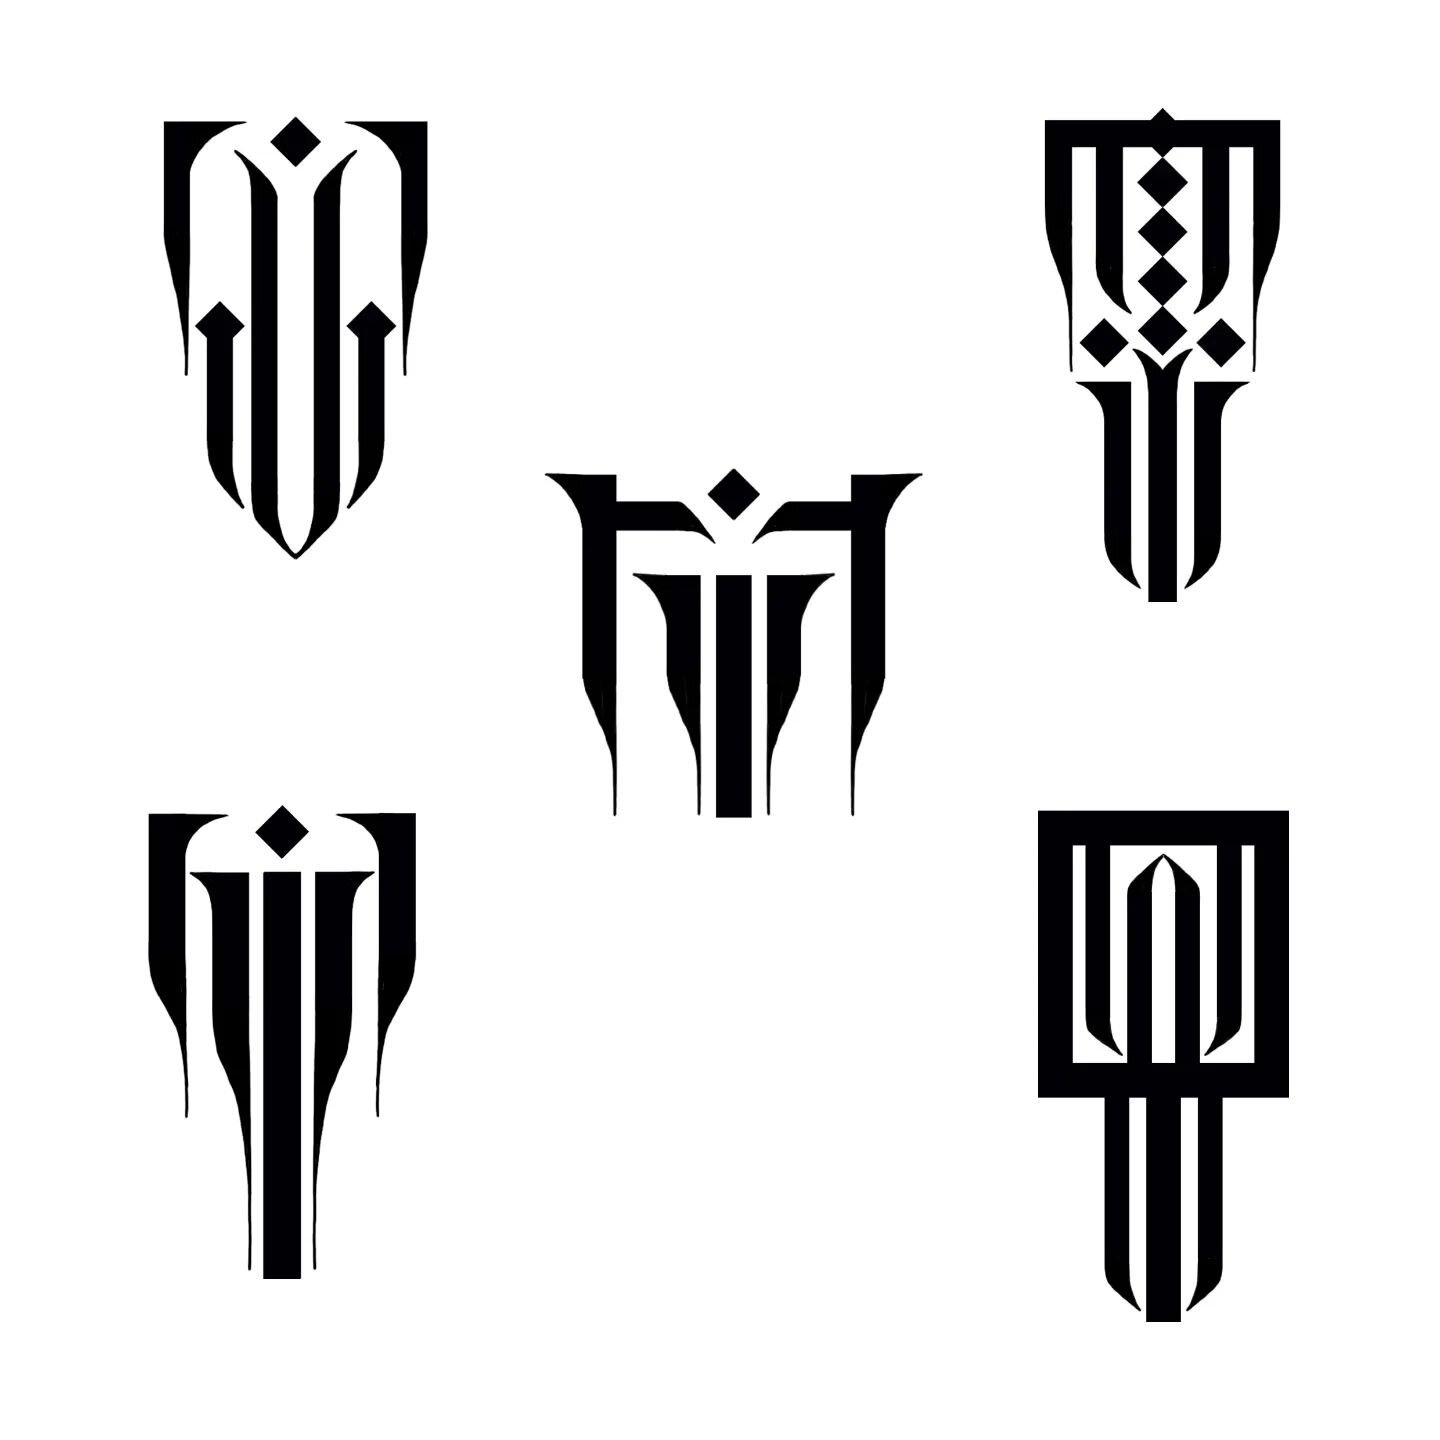 More insignia available for tattoo.
I would love to do these big!
.
DM to get one.
.
.
.
#tattoo #tattooing #tattooart #skinart #tattoosheffield #Sheffieldtattoo #sheffieldtattooartist #yorkshiretattoo #yorkshiretattooartist #asemicart #asemicdesign 